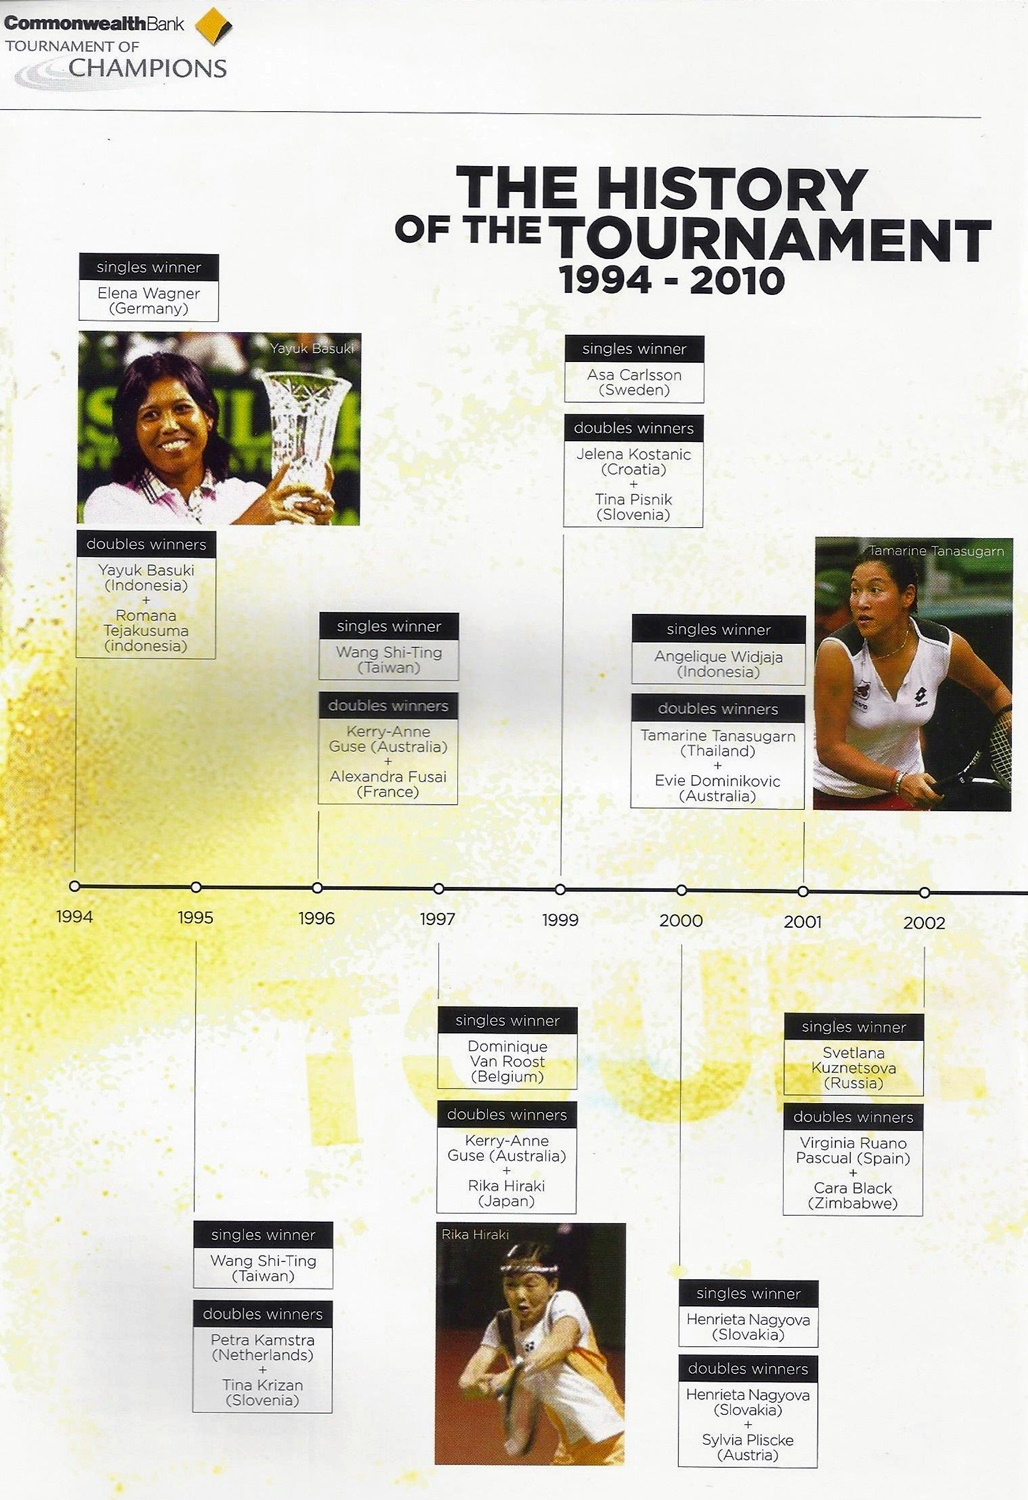 The History of the Tournament #3 by Barry Wood